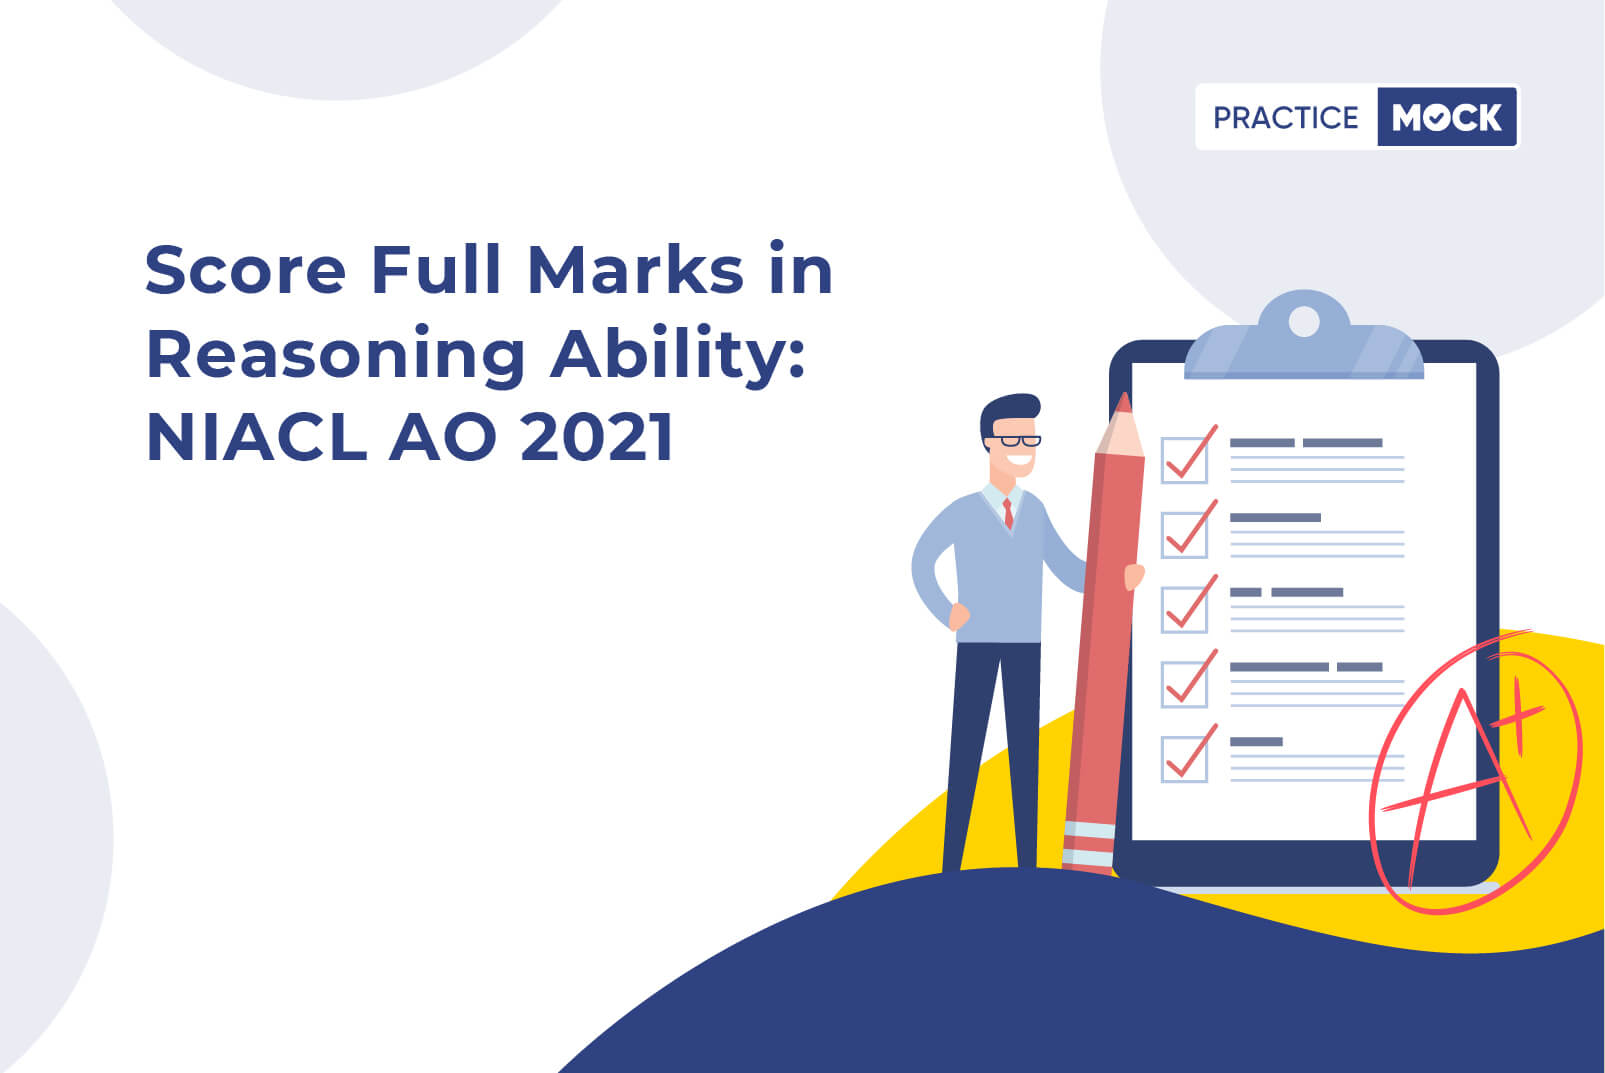 Score 30+ Marks in Reasoning Ability-NIACL AO 2021